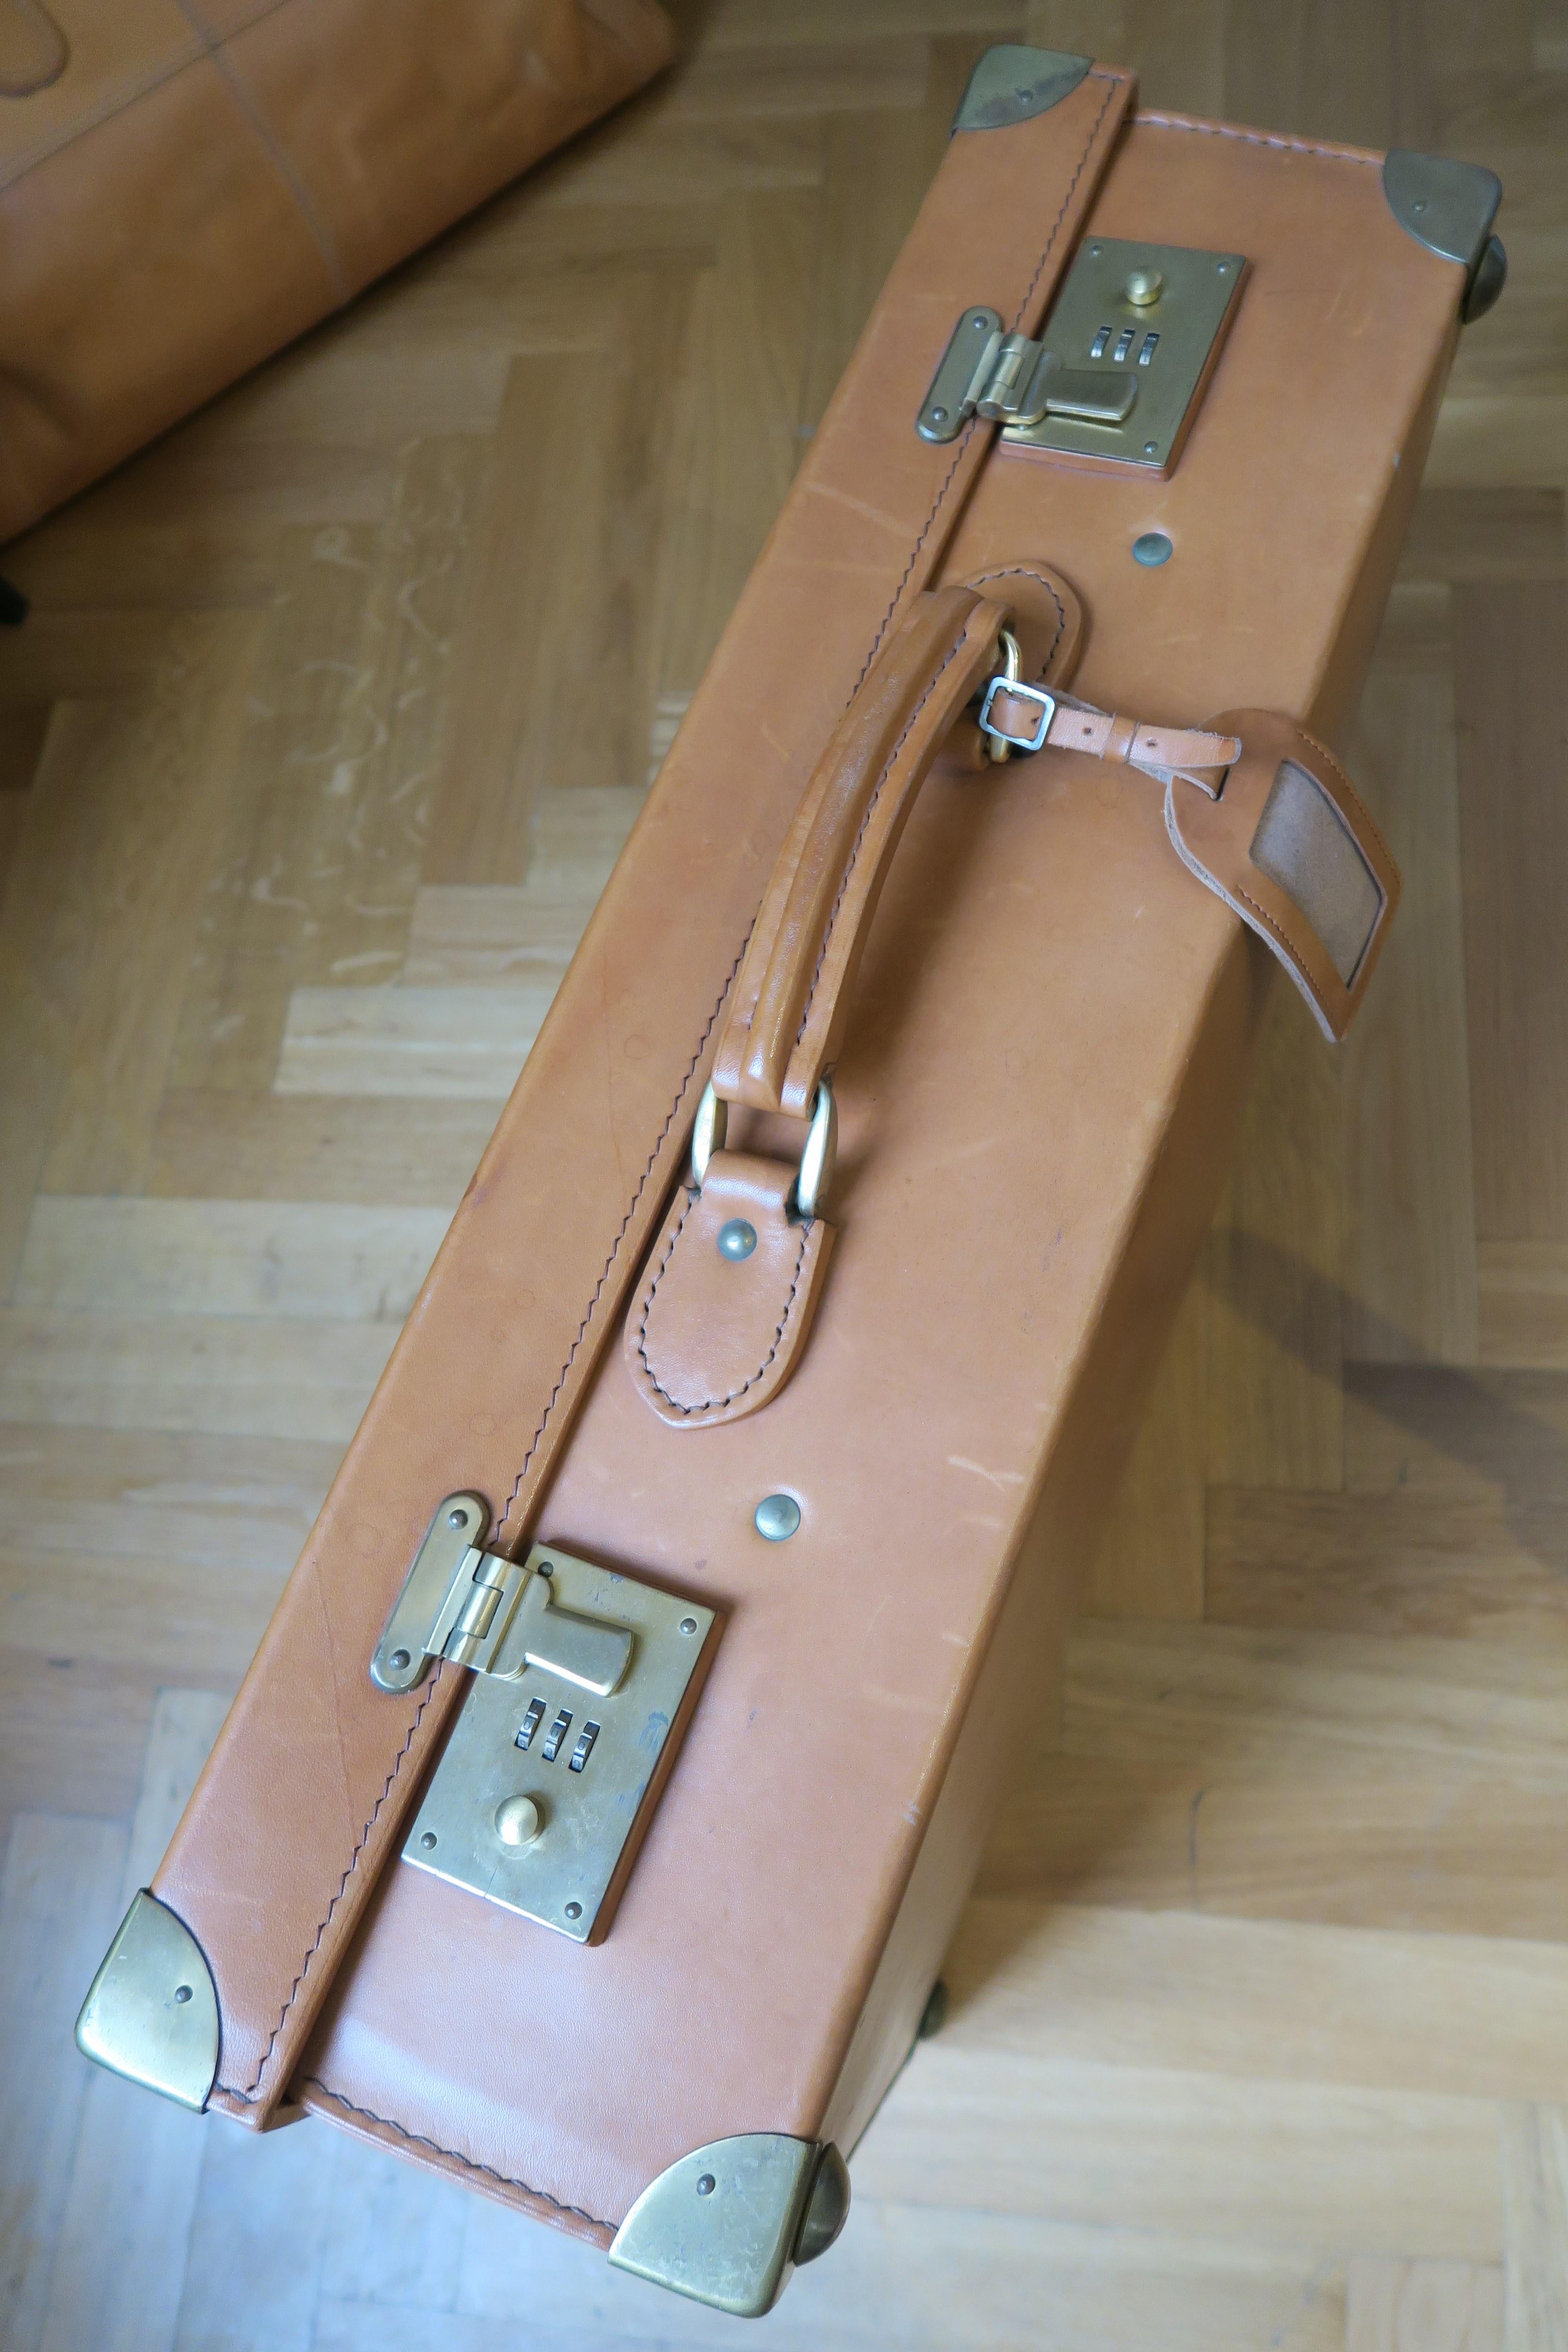 The item on sale is a beautifully constructed suitcase made from cowhide. All the handles, zippers and flaps look untouched. It comes with a matching label for the owner's address and brass hardware. The inside is silk lined. The bottom is still